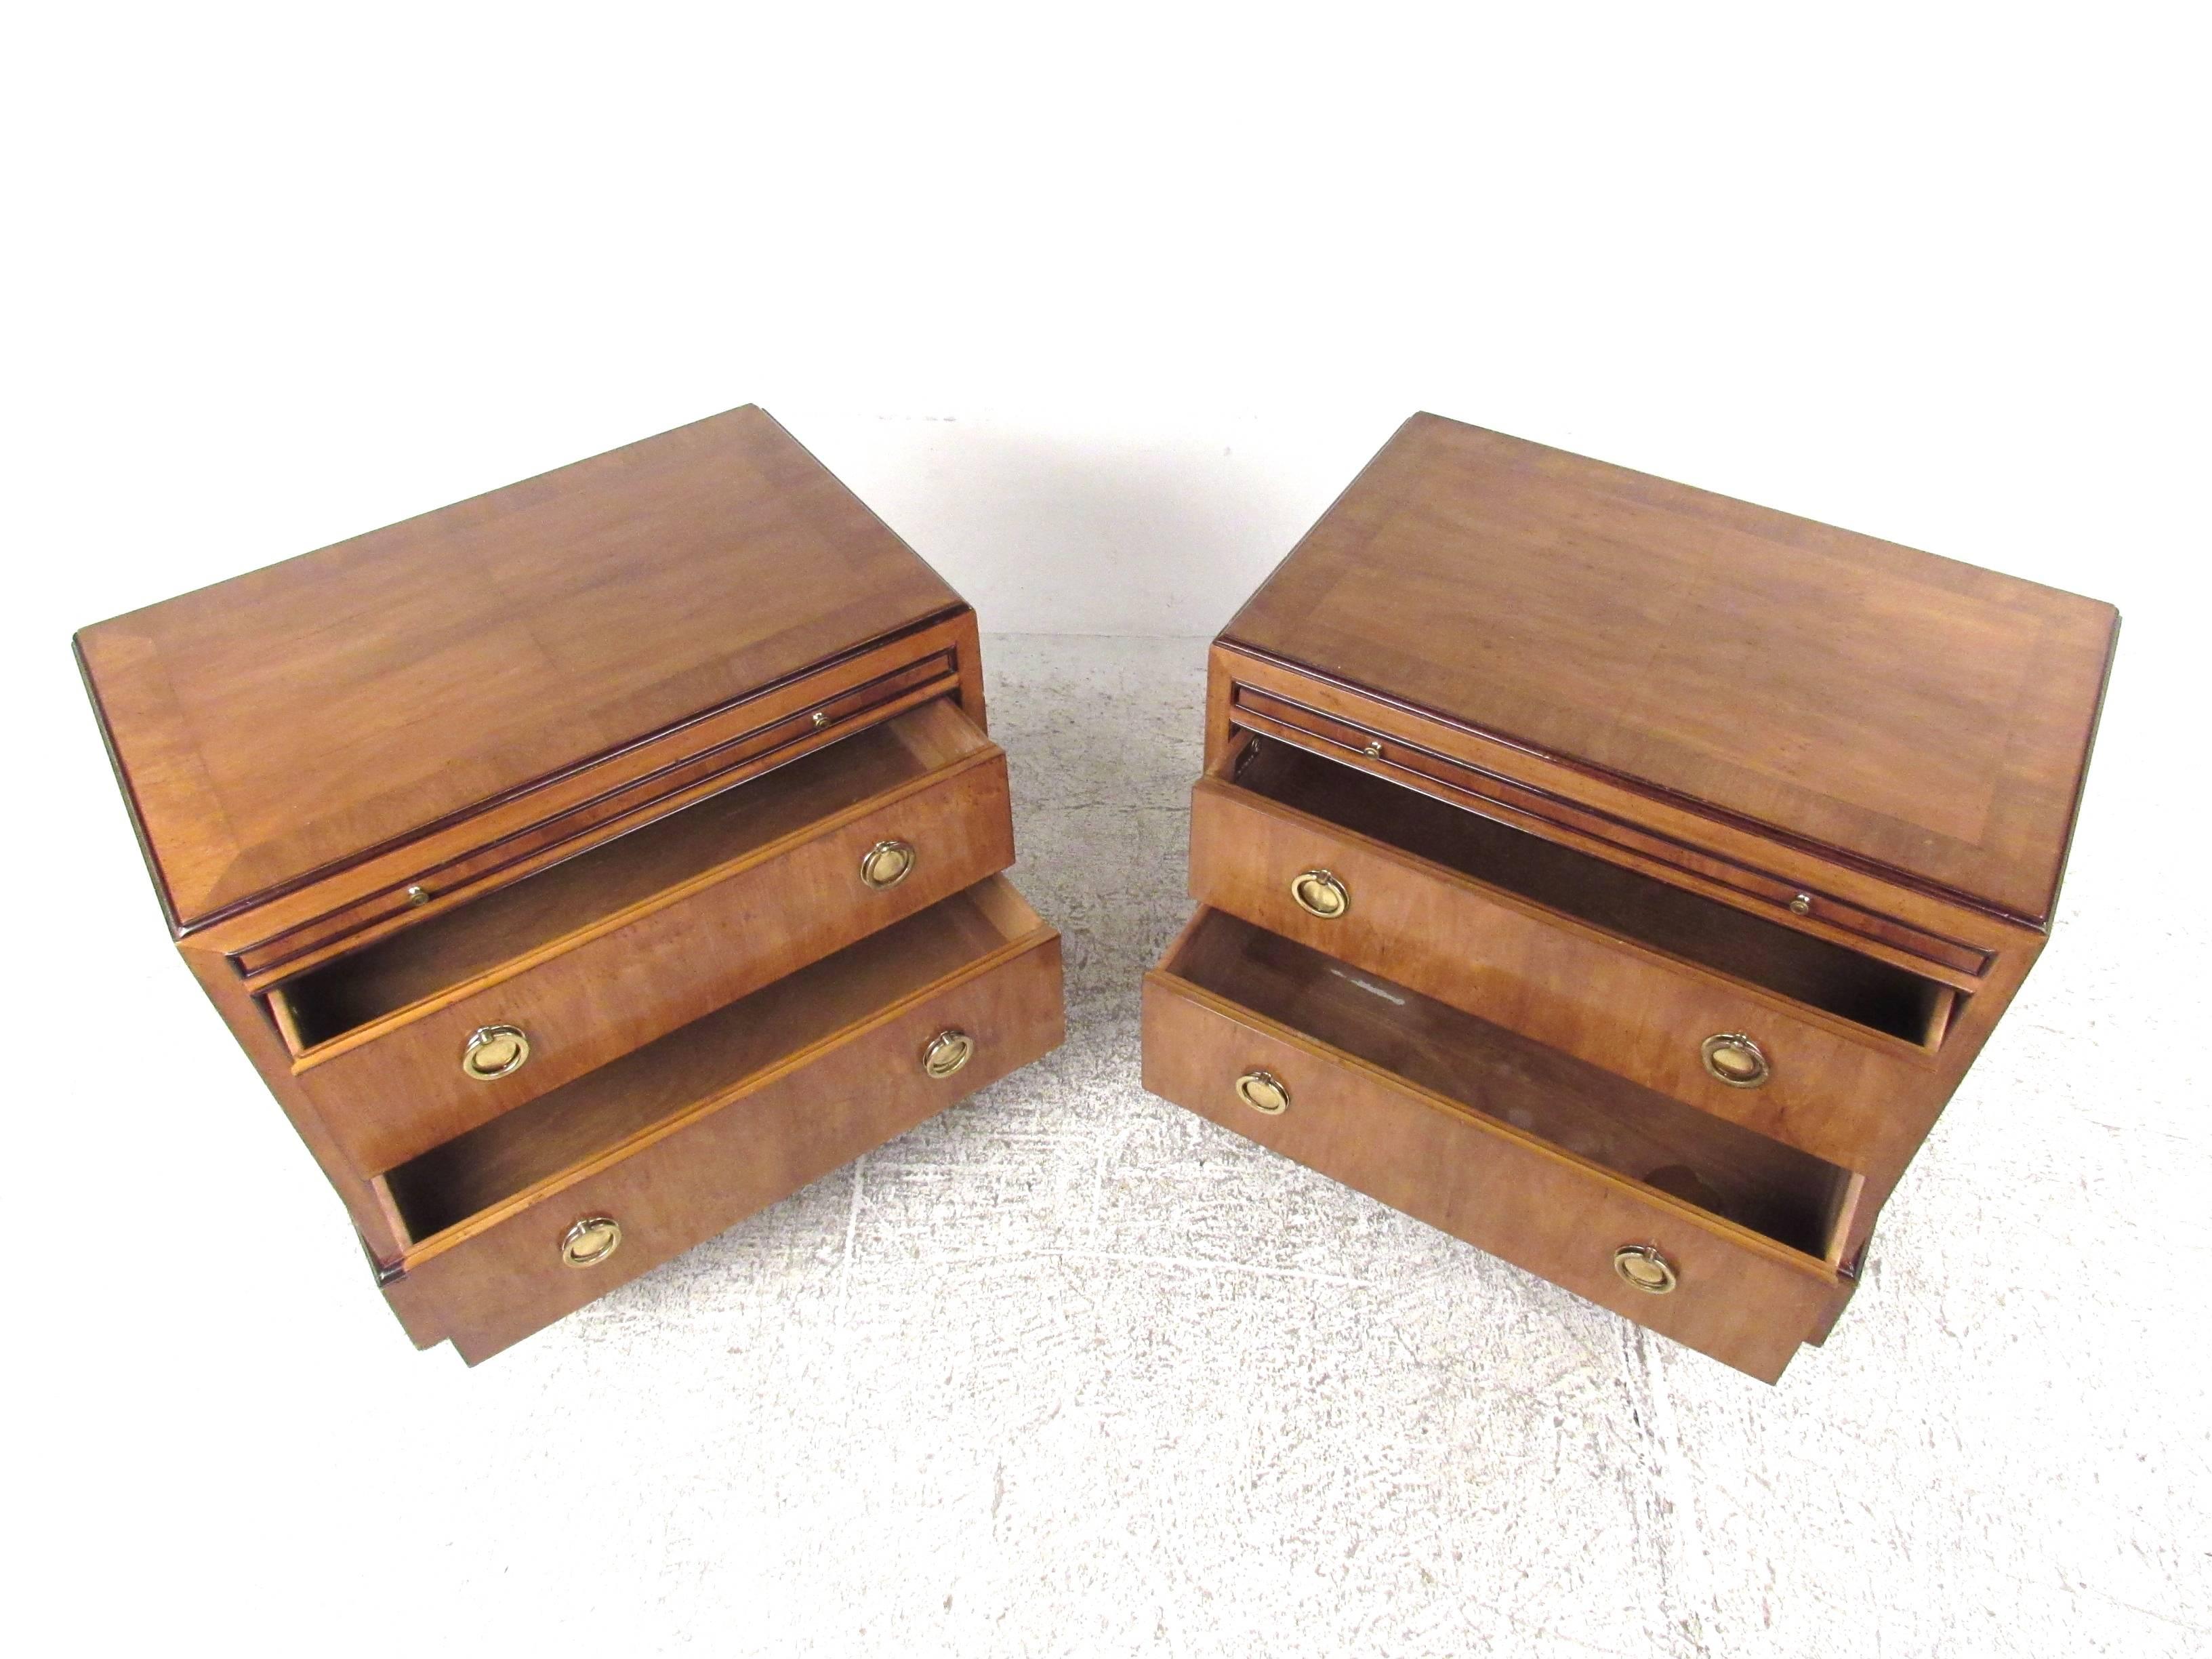 This stunning pair of Mid-Century nightstands features brass ring pulls and a remarkable vintage finish. Plenty of storage in these two-drawer matching end tables, complete with pull-out tray. Unique trim and shapely design make these a stylish